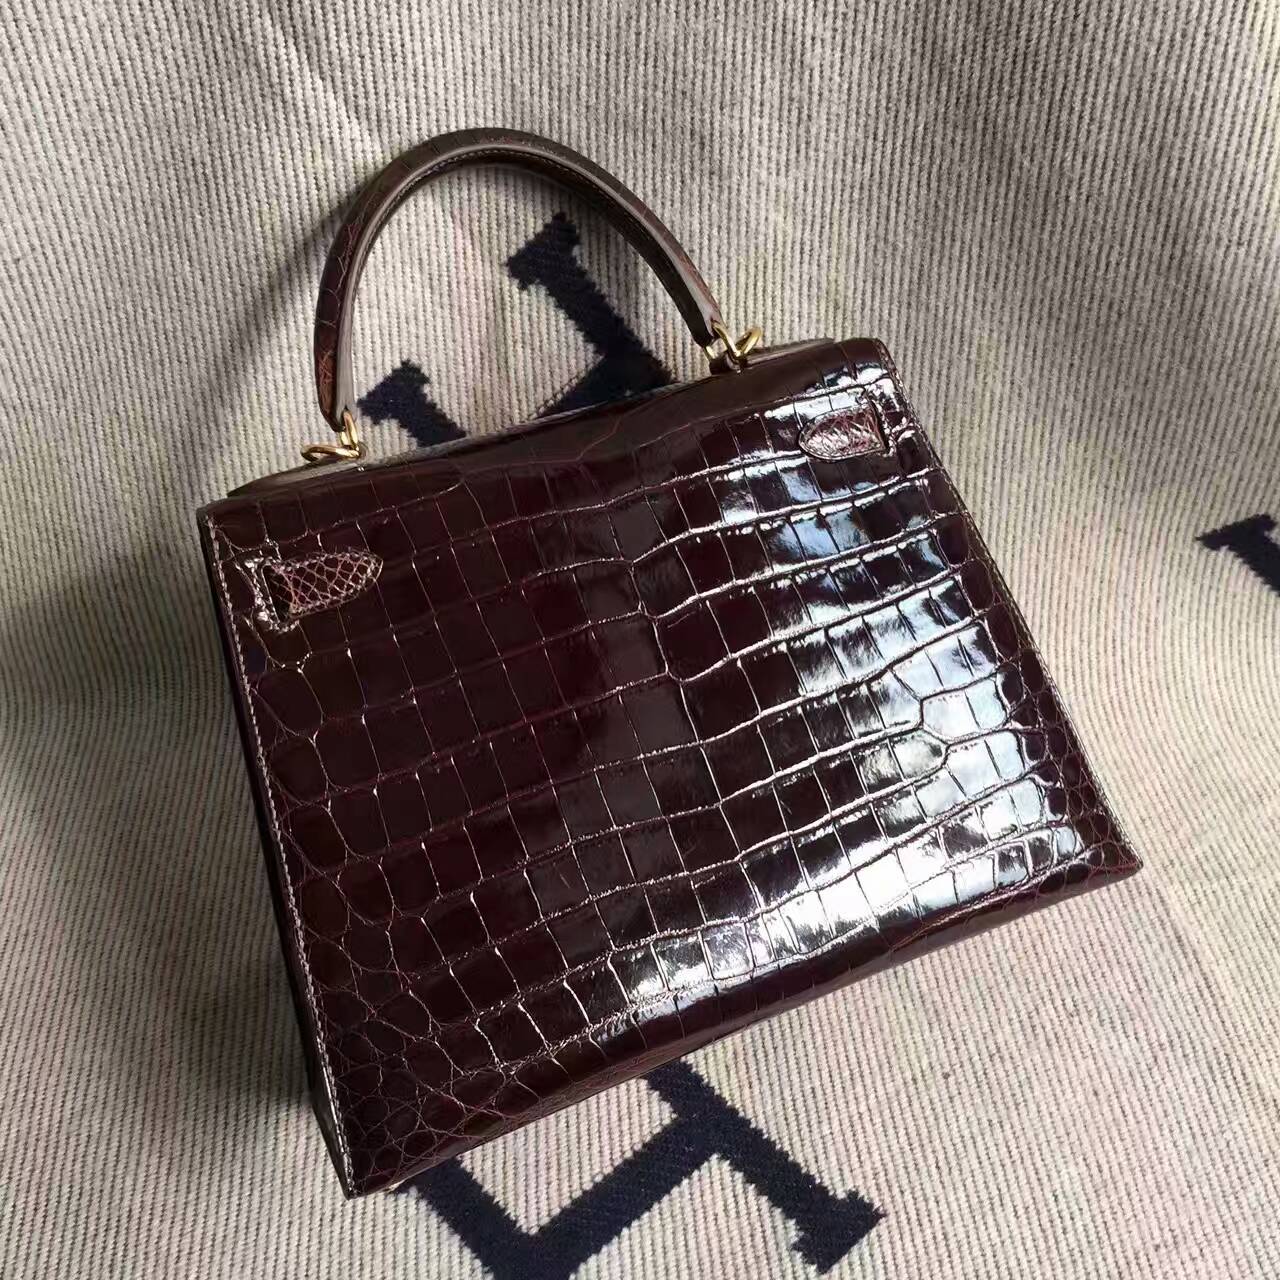 Discount Hermes Crocodile Shiny Leather Sellier Kelly28cm in Chocolate Color